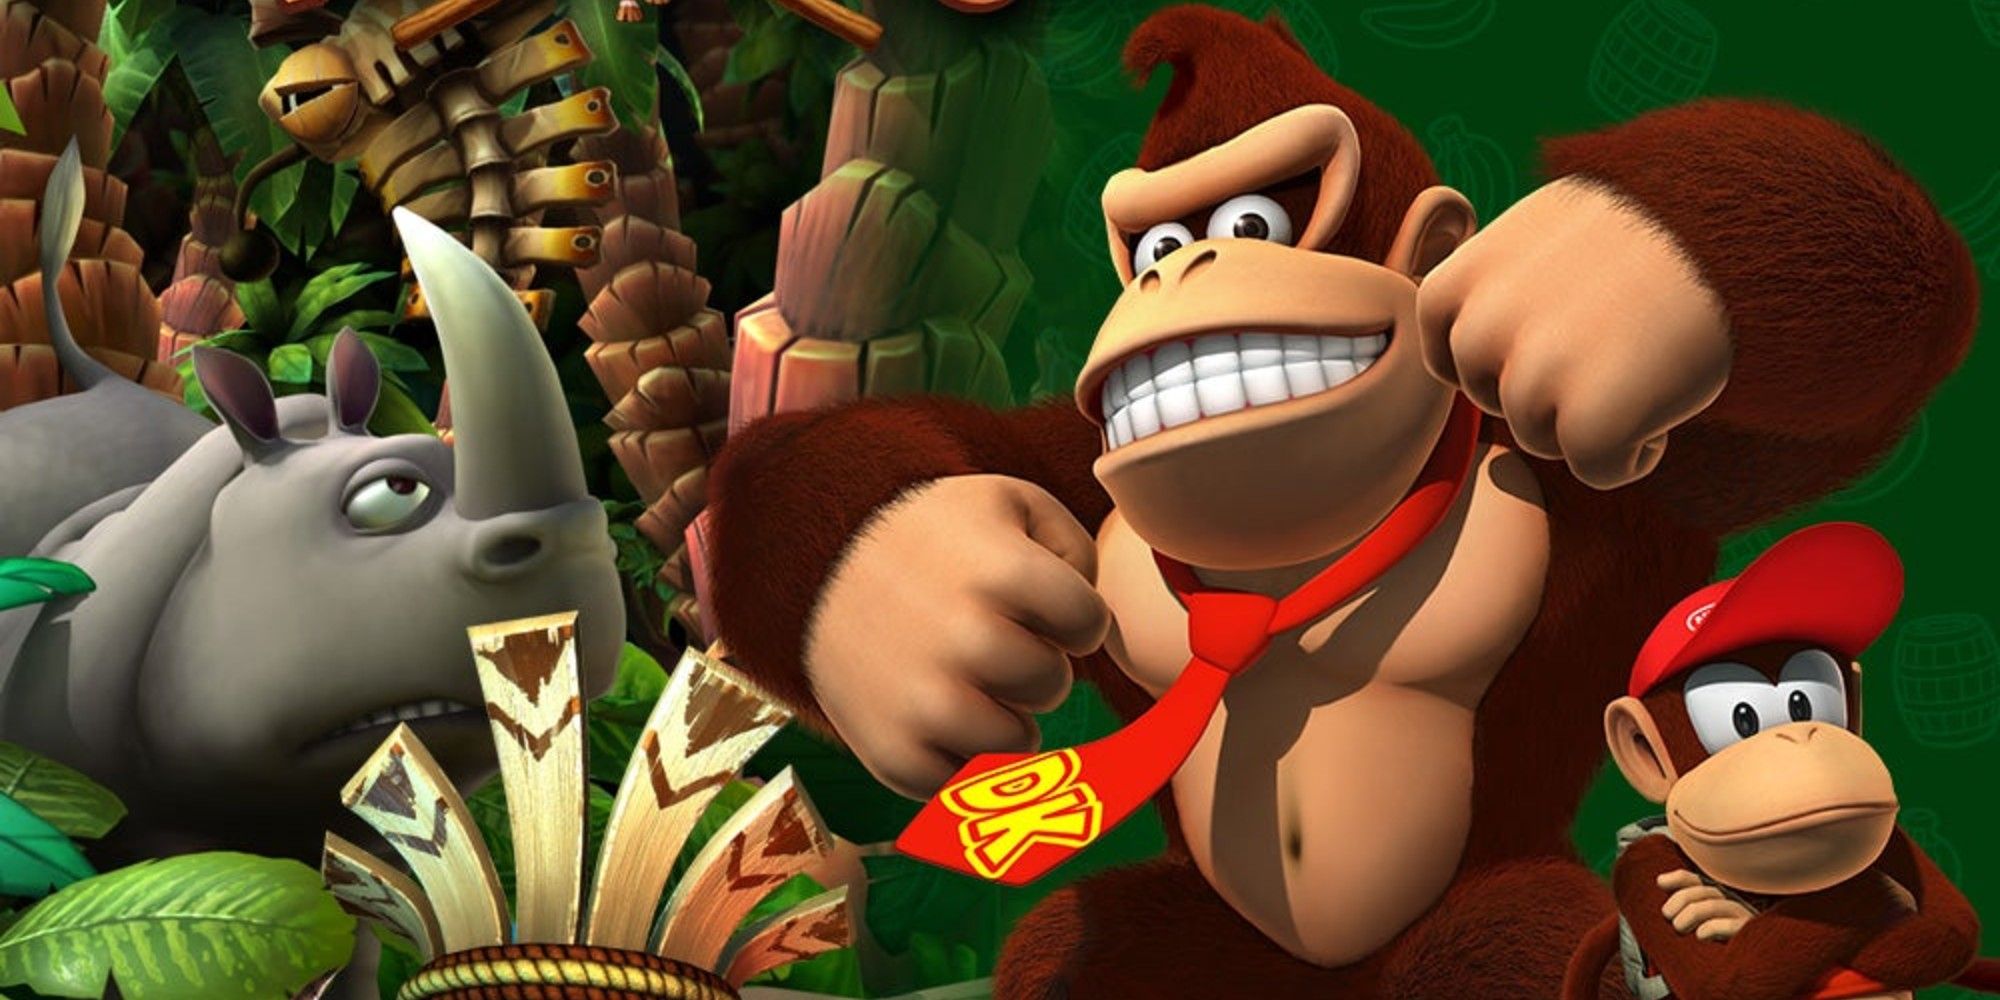 Donkey Kong, Diddy Kong, and Rambi in Nintendo's Donkey Kong Country Returns